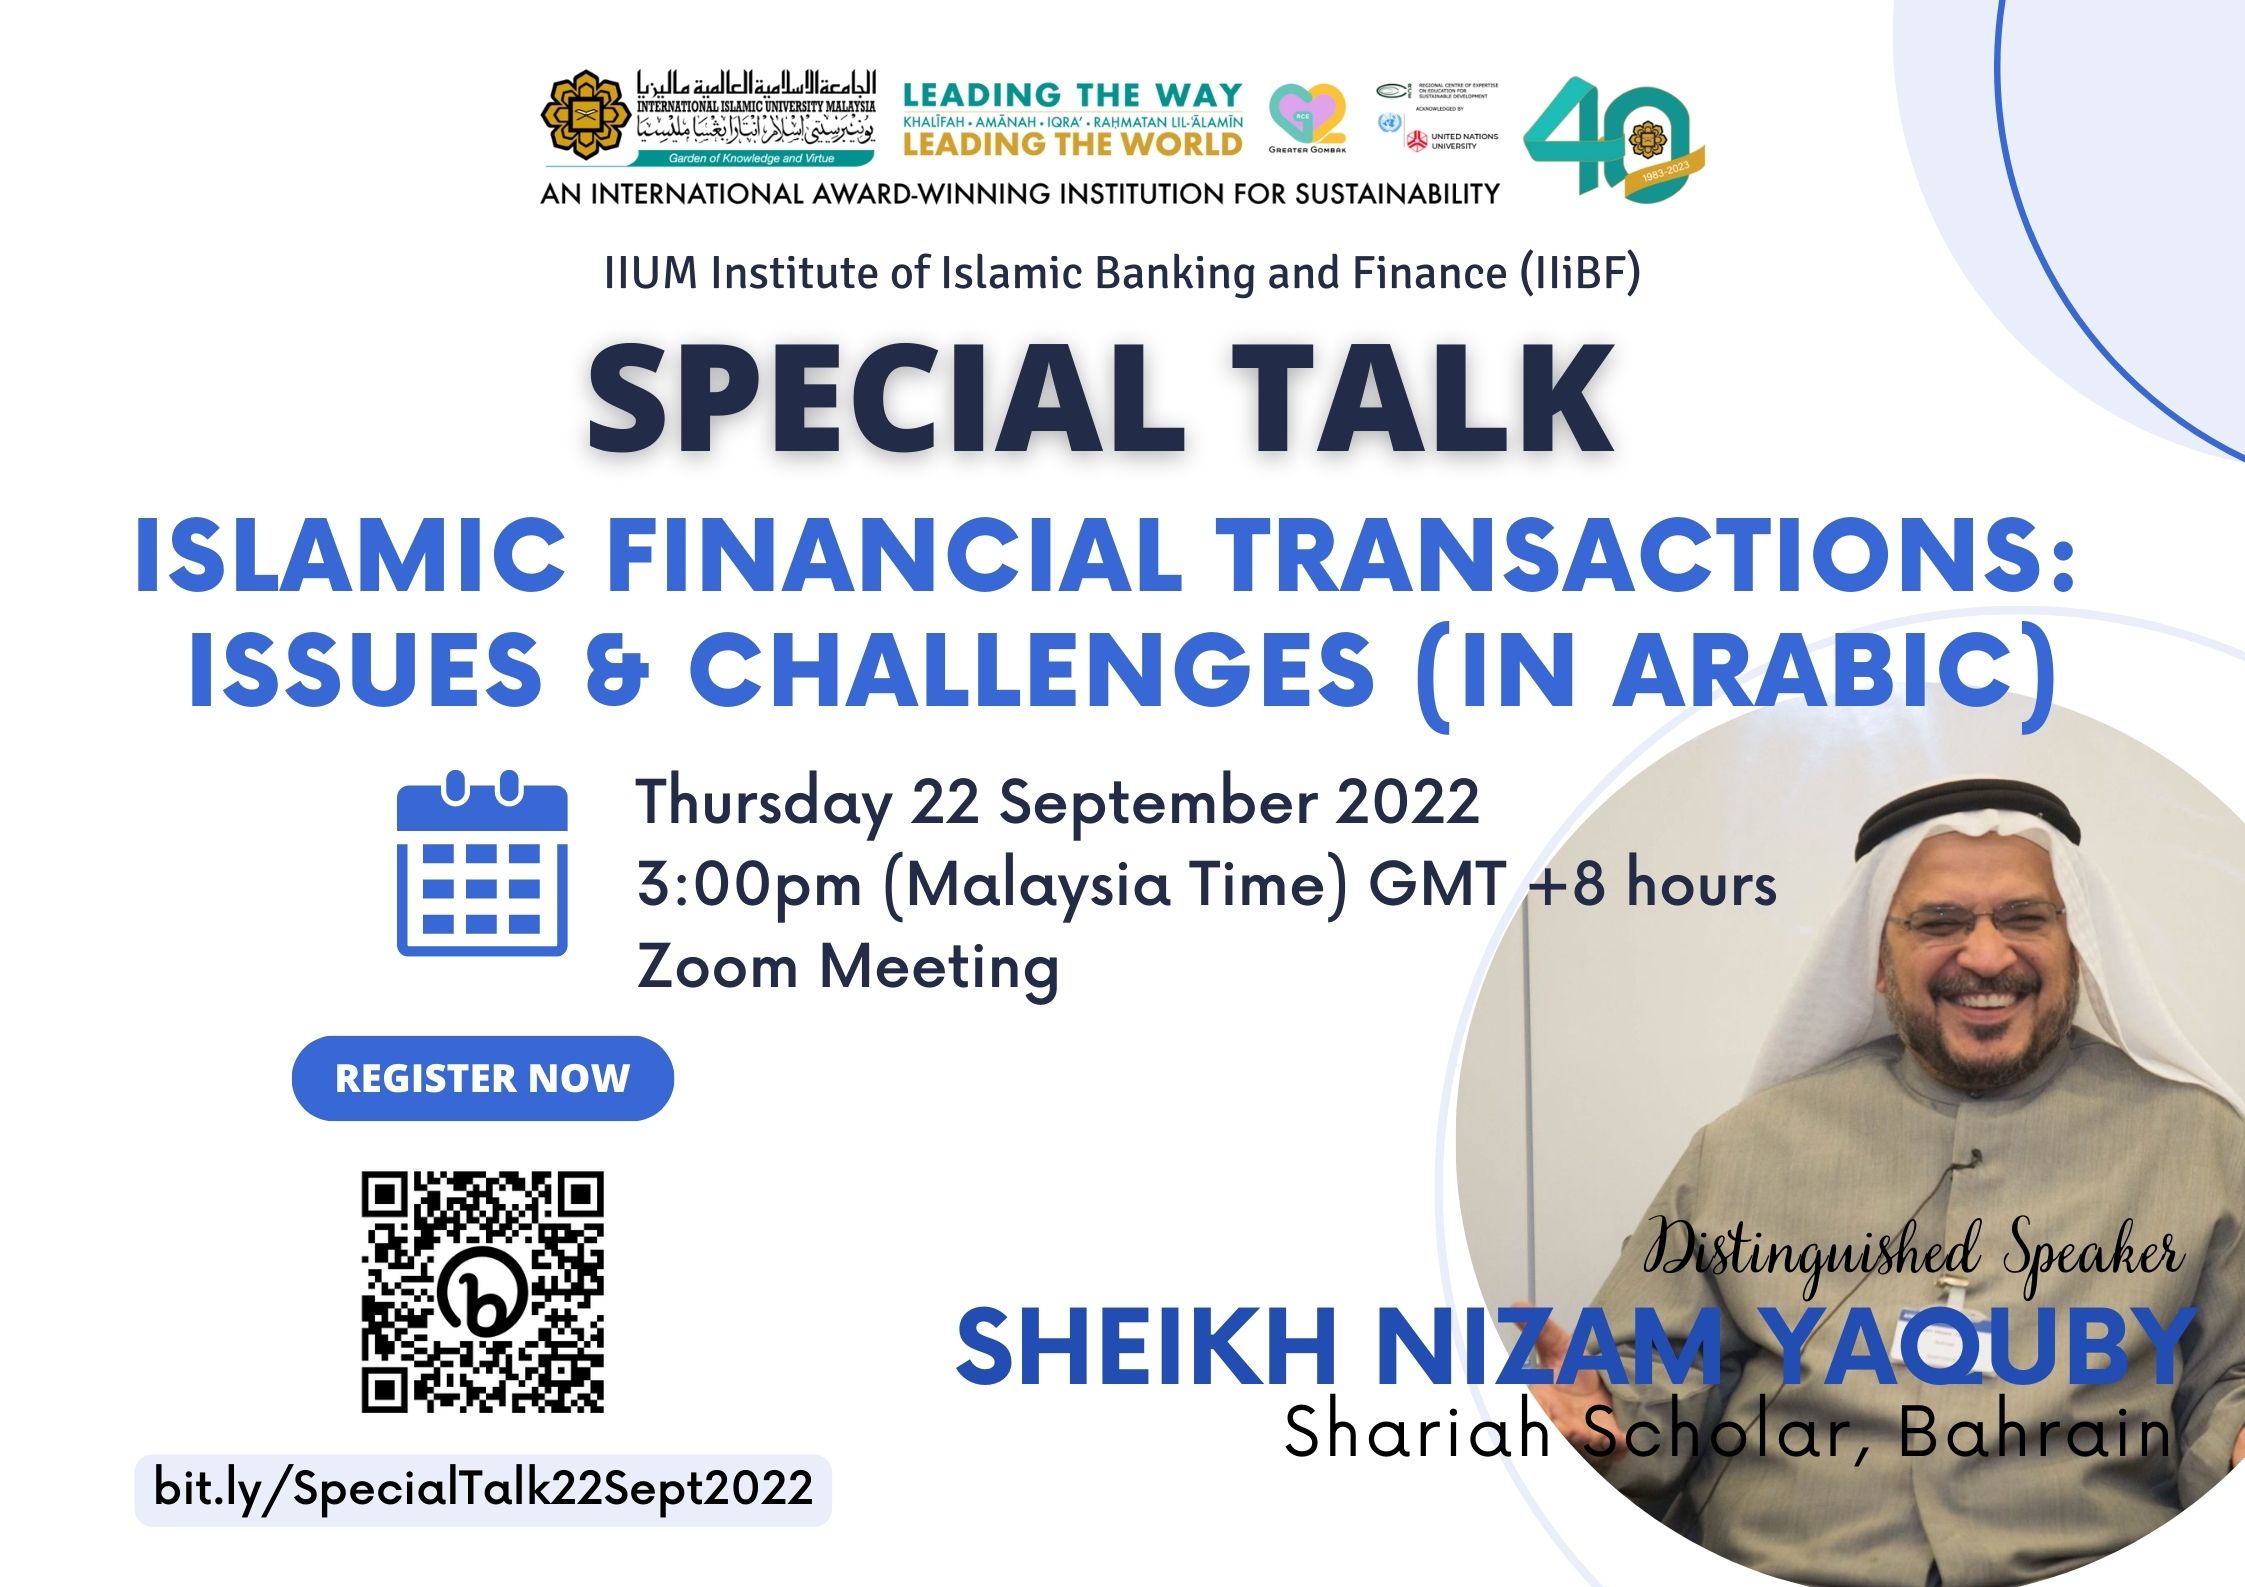 Special Talk on Islamic Financial Transactions : Issues & Challenges (in Arabic) | Thursday, 22 September 2022